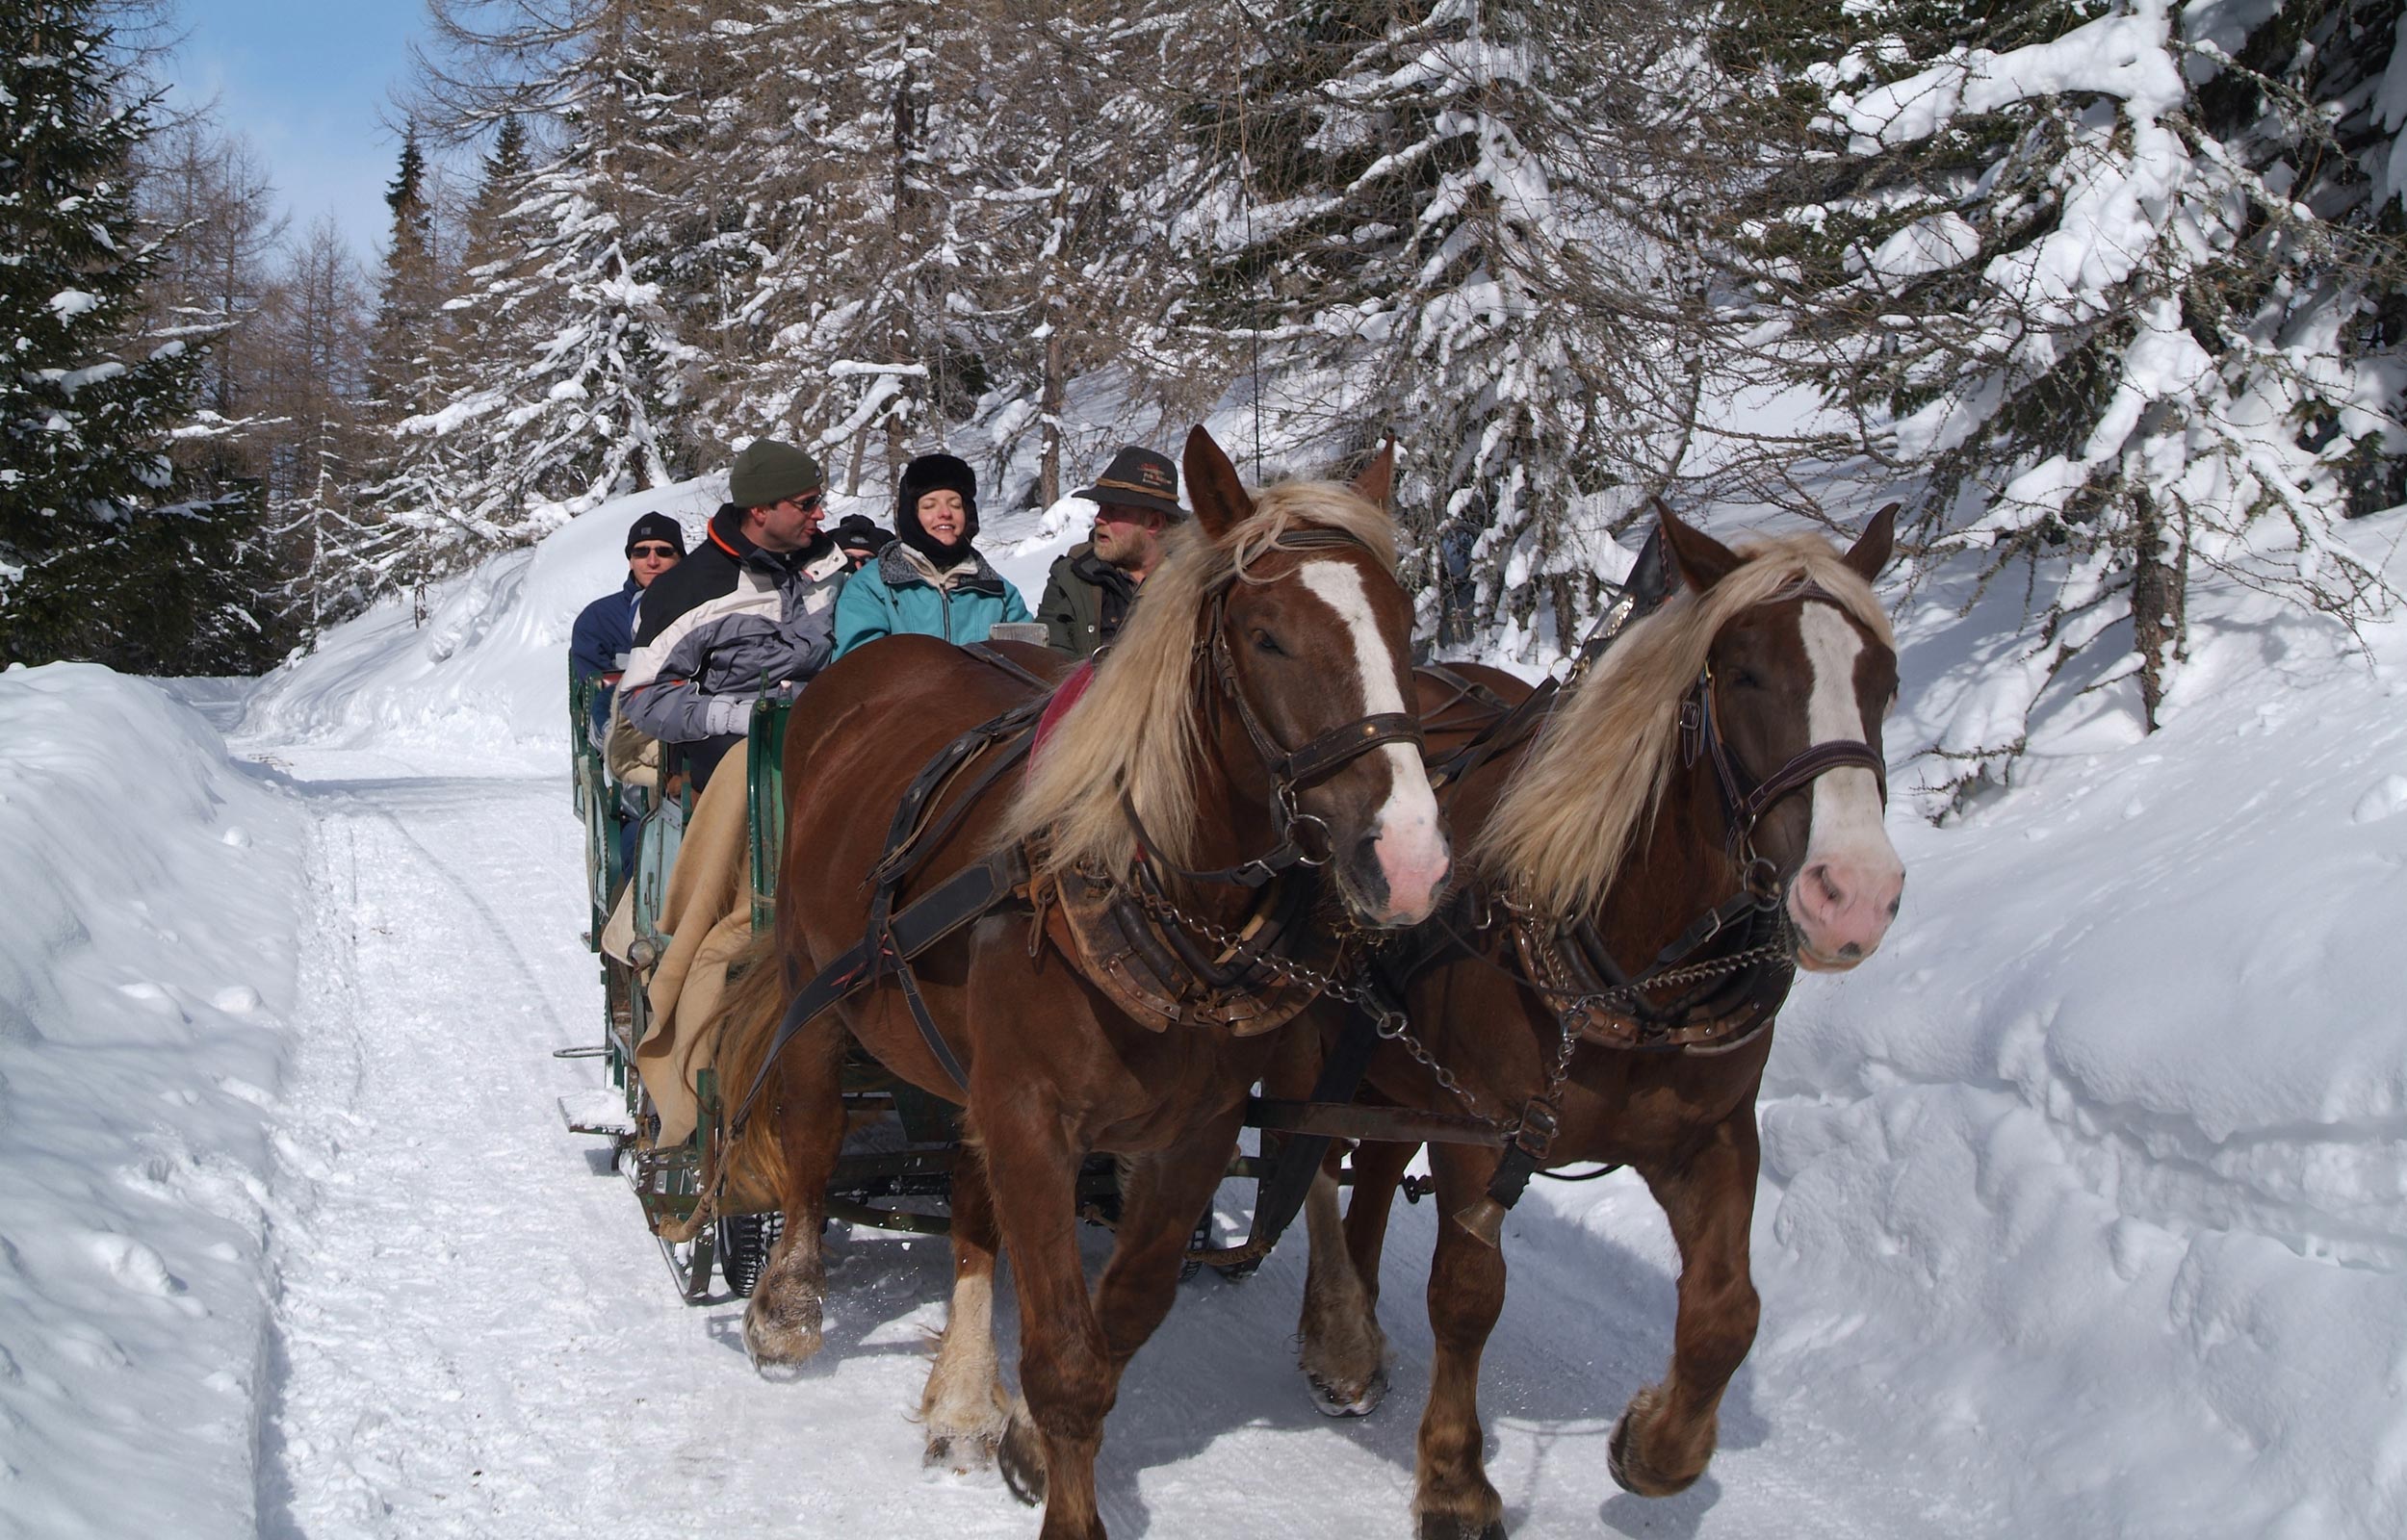 A horse-drawn carriage drives along a snow-covered path in a wintry landscape.